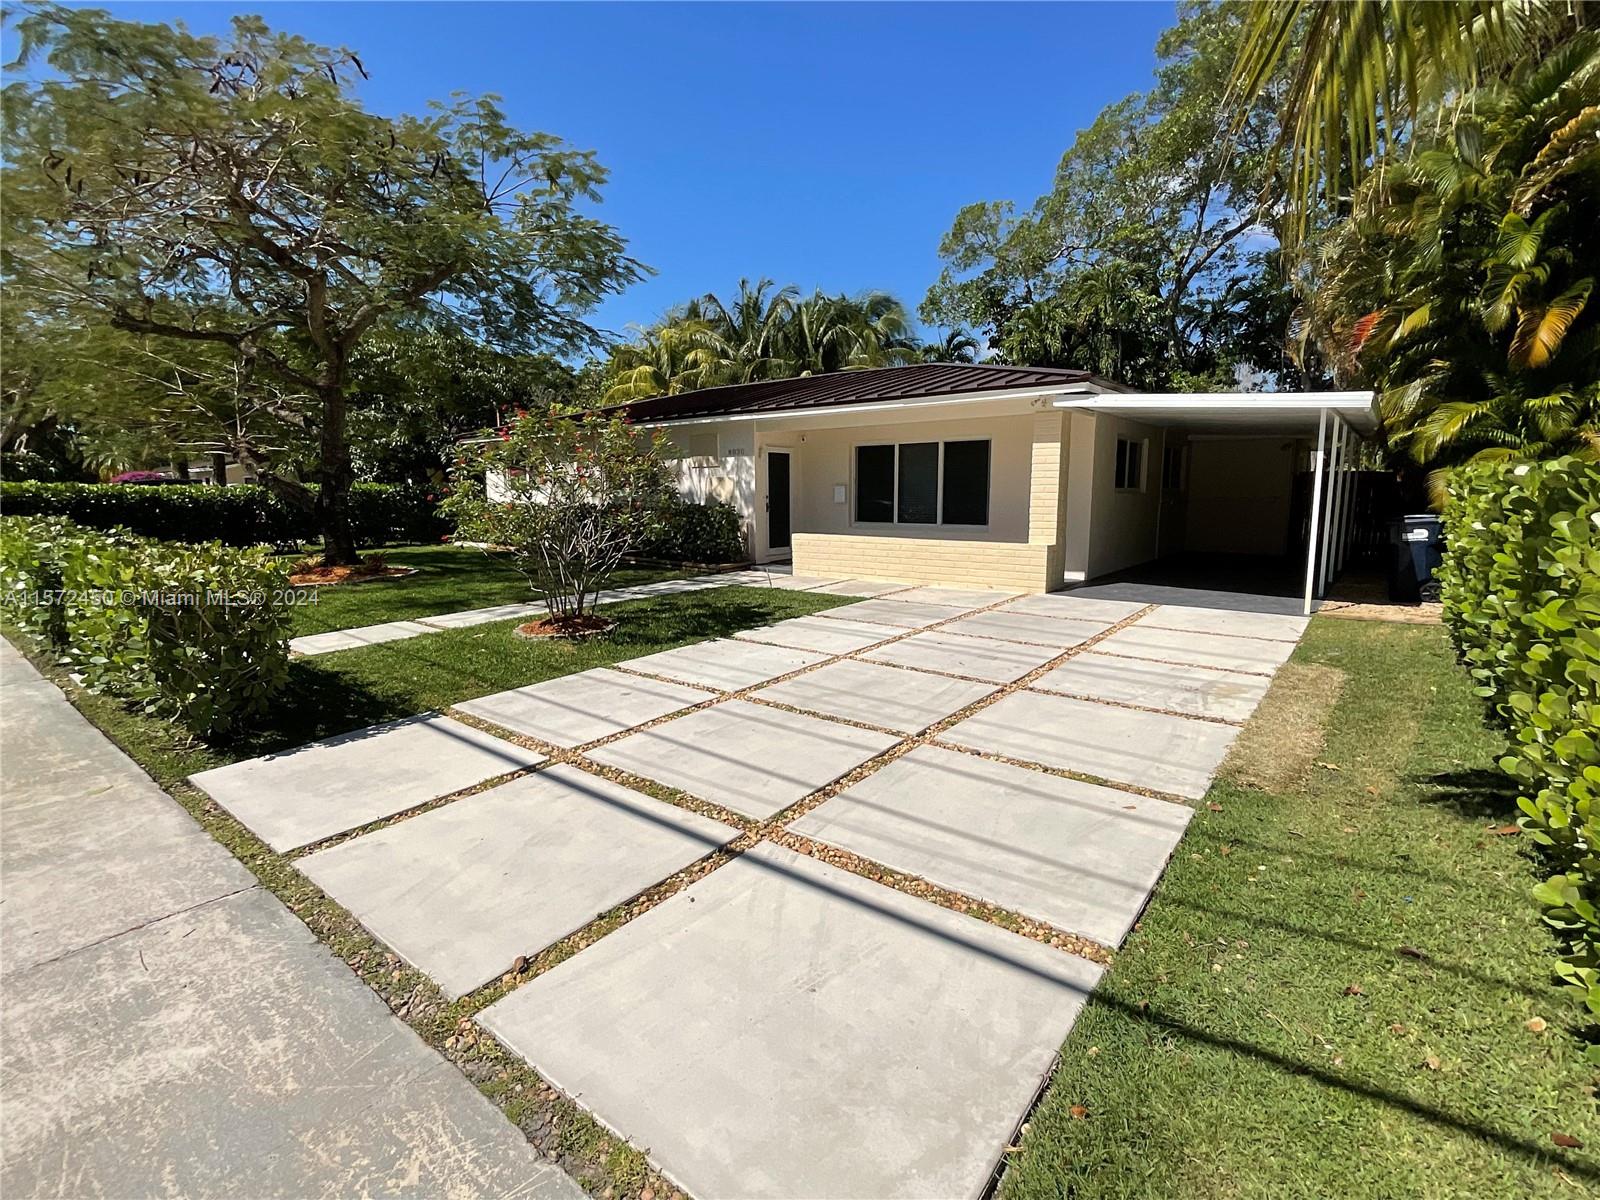 8030 SW 63rd Pl, Miami, Florida 33143, 3 Bedrooms Bedrooms, 2 Rooms Rooms,2 BathroomsBathrooms,Residential,For Sale,8030 SW 63rd Pl,A11572450